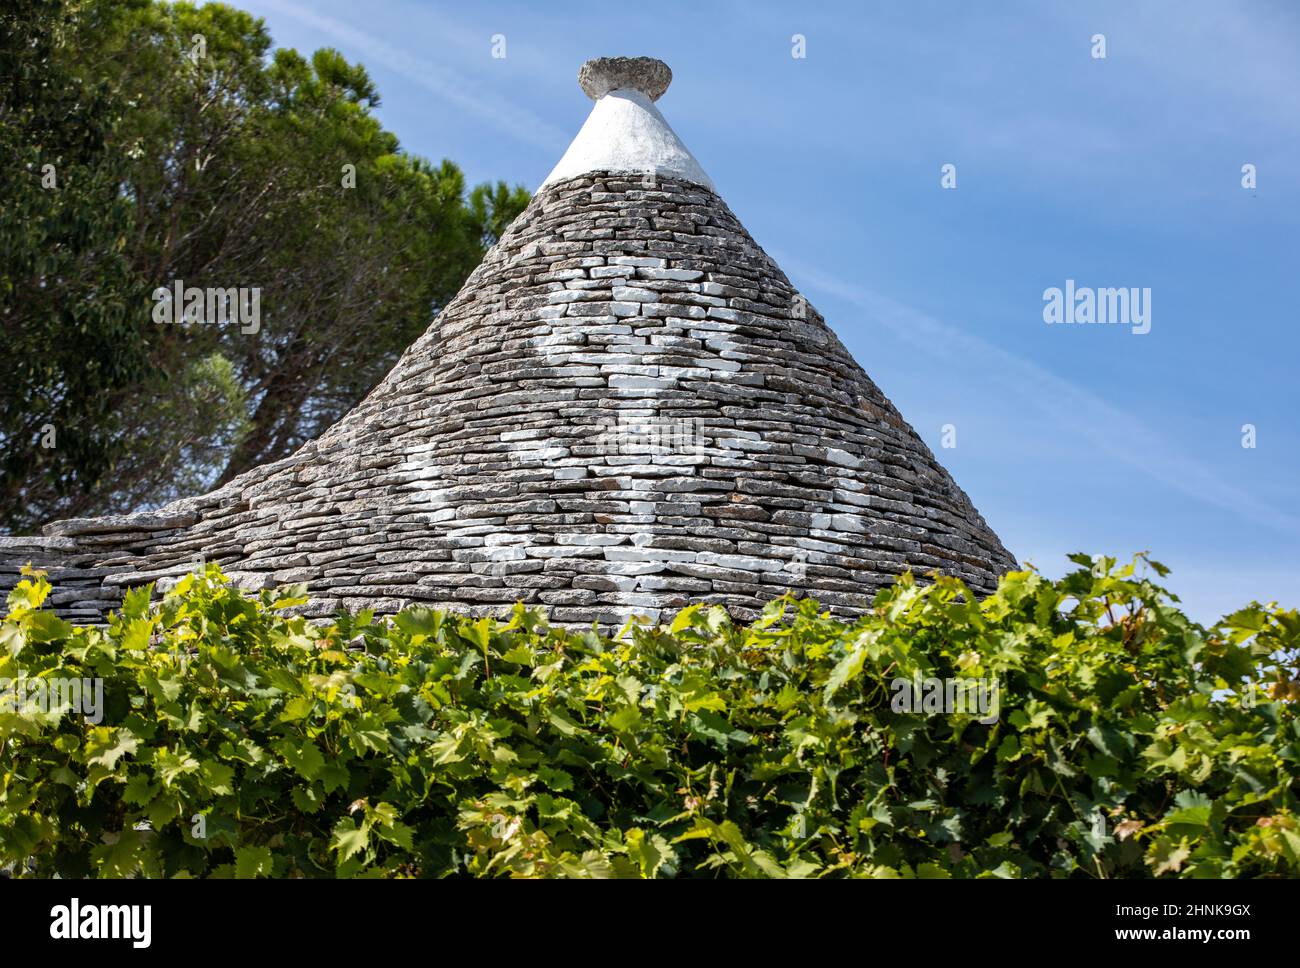 Grapevines on the stone roof of Trulli House in Alberobello, Italy. Stock Photo